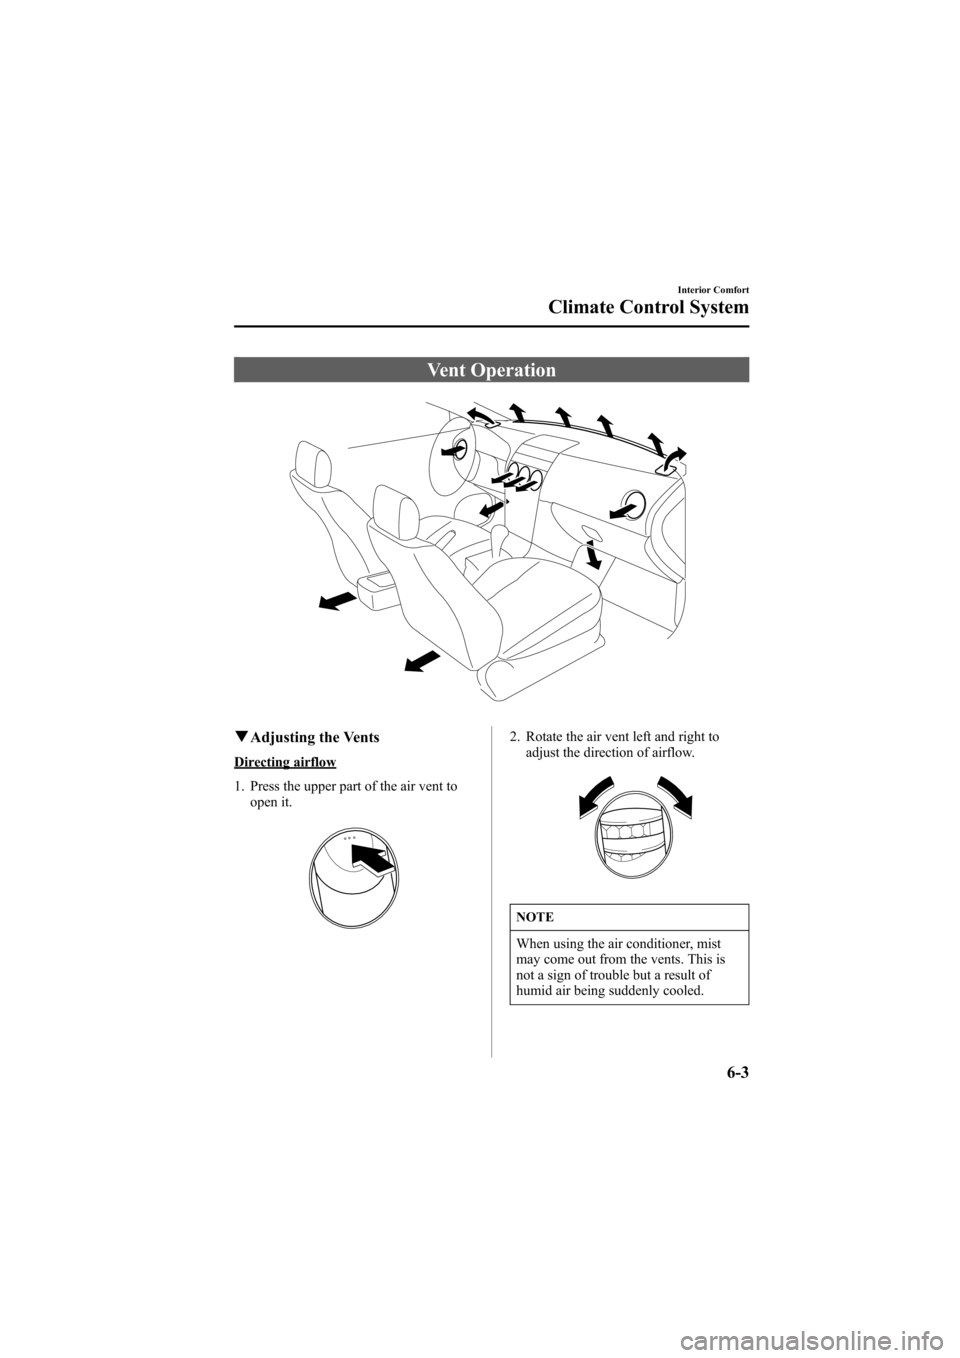 MAZDA MODEL 6 2005  Owners Manual (in English) Black plate (175,1)
Vent Operation
qAdjusting the Vents
Directing airflow
1. Press the upper part of the air vent to
open it.
2. Rotate the air vent left and right to
adjust the direction of airflow.
